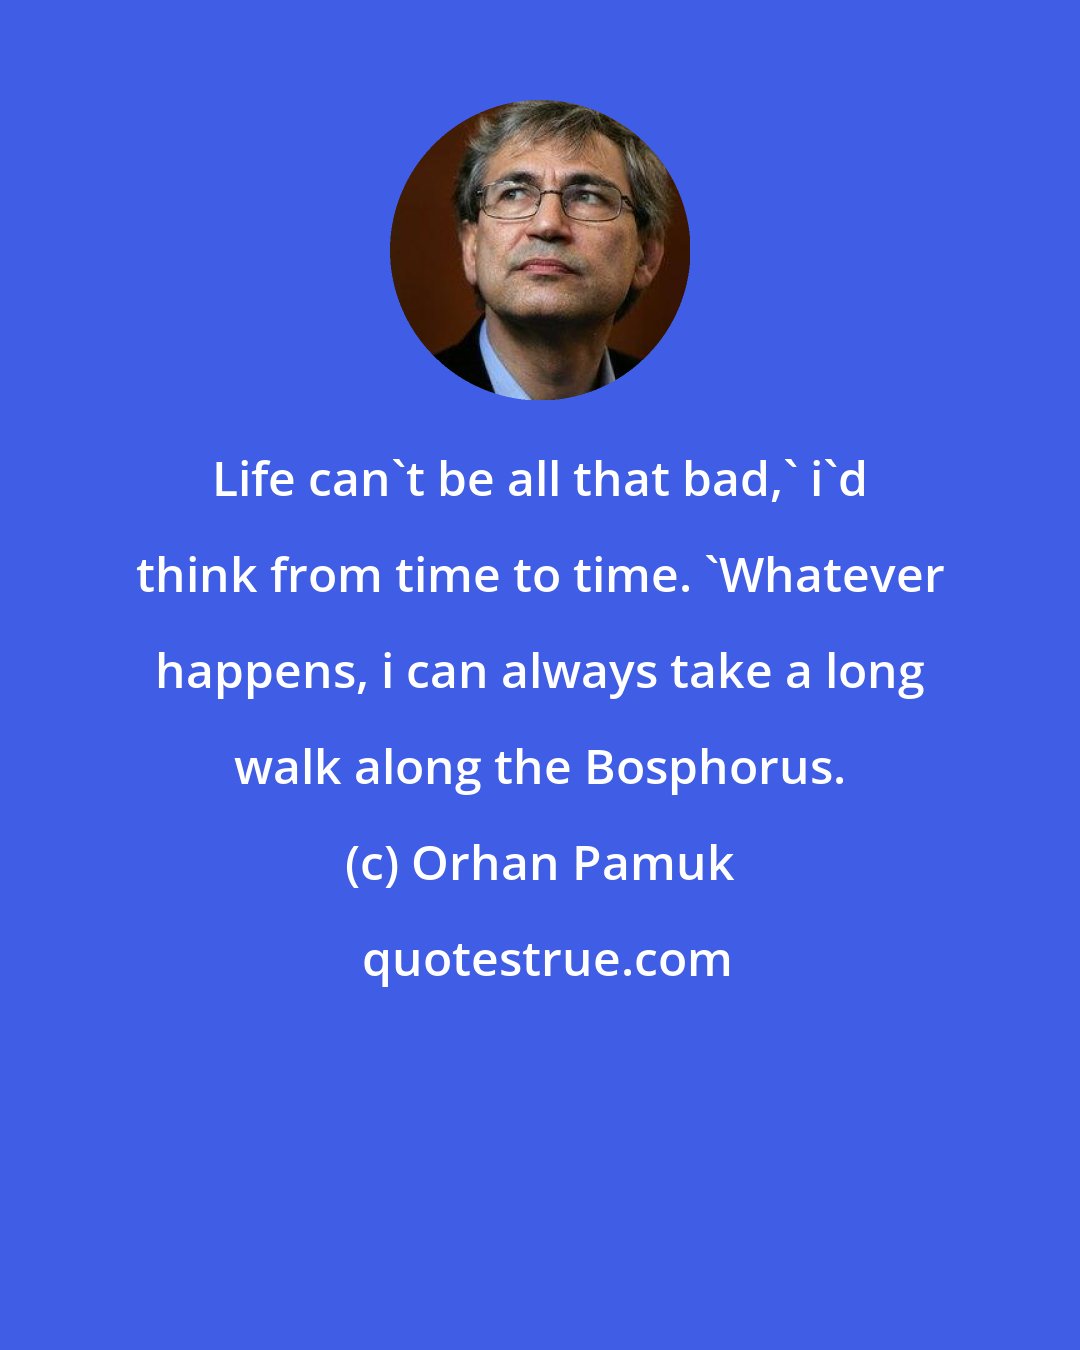 Orhan Pamuk: Life can't be all that bad,' i'd think from time to time. 'Whatever happens, i can always take a long walk along the Bosphorus.